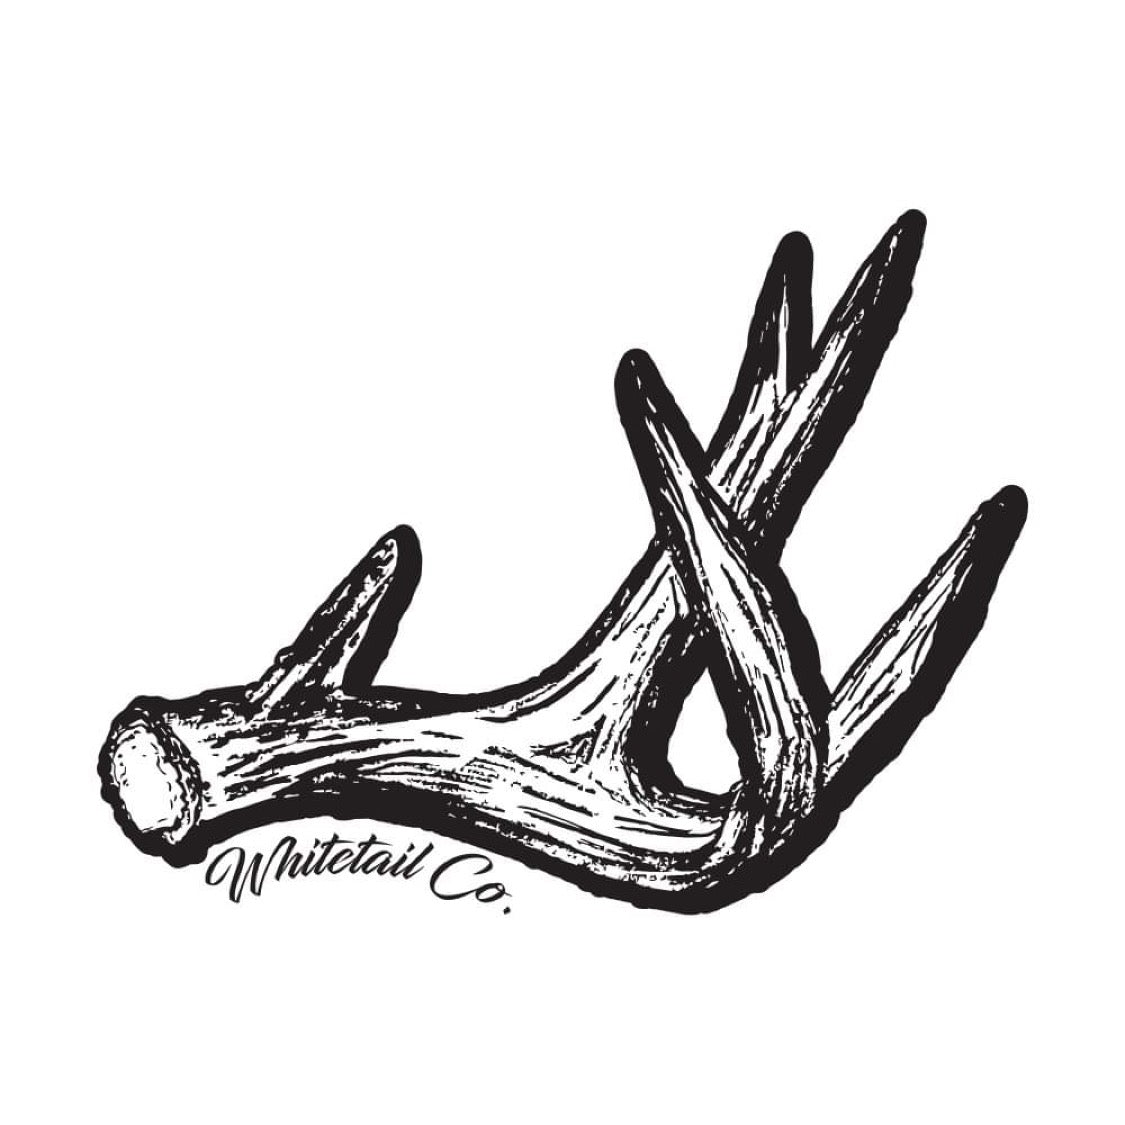 3” Whitetail Co. Shed Antler Decal